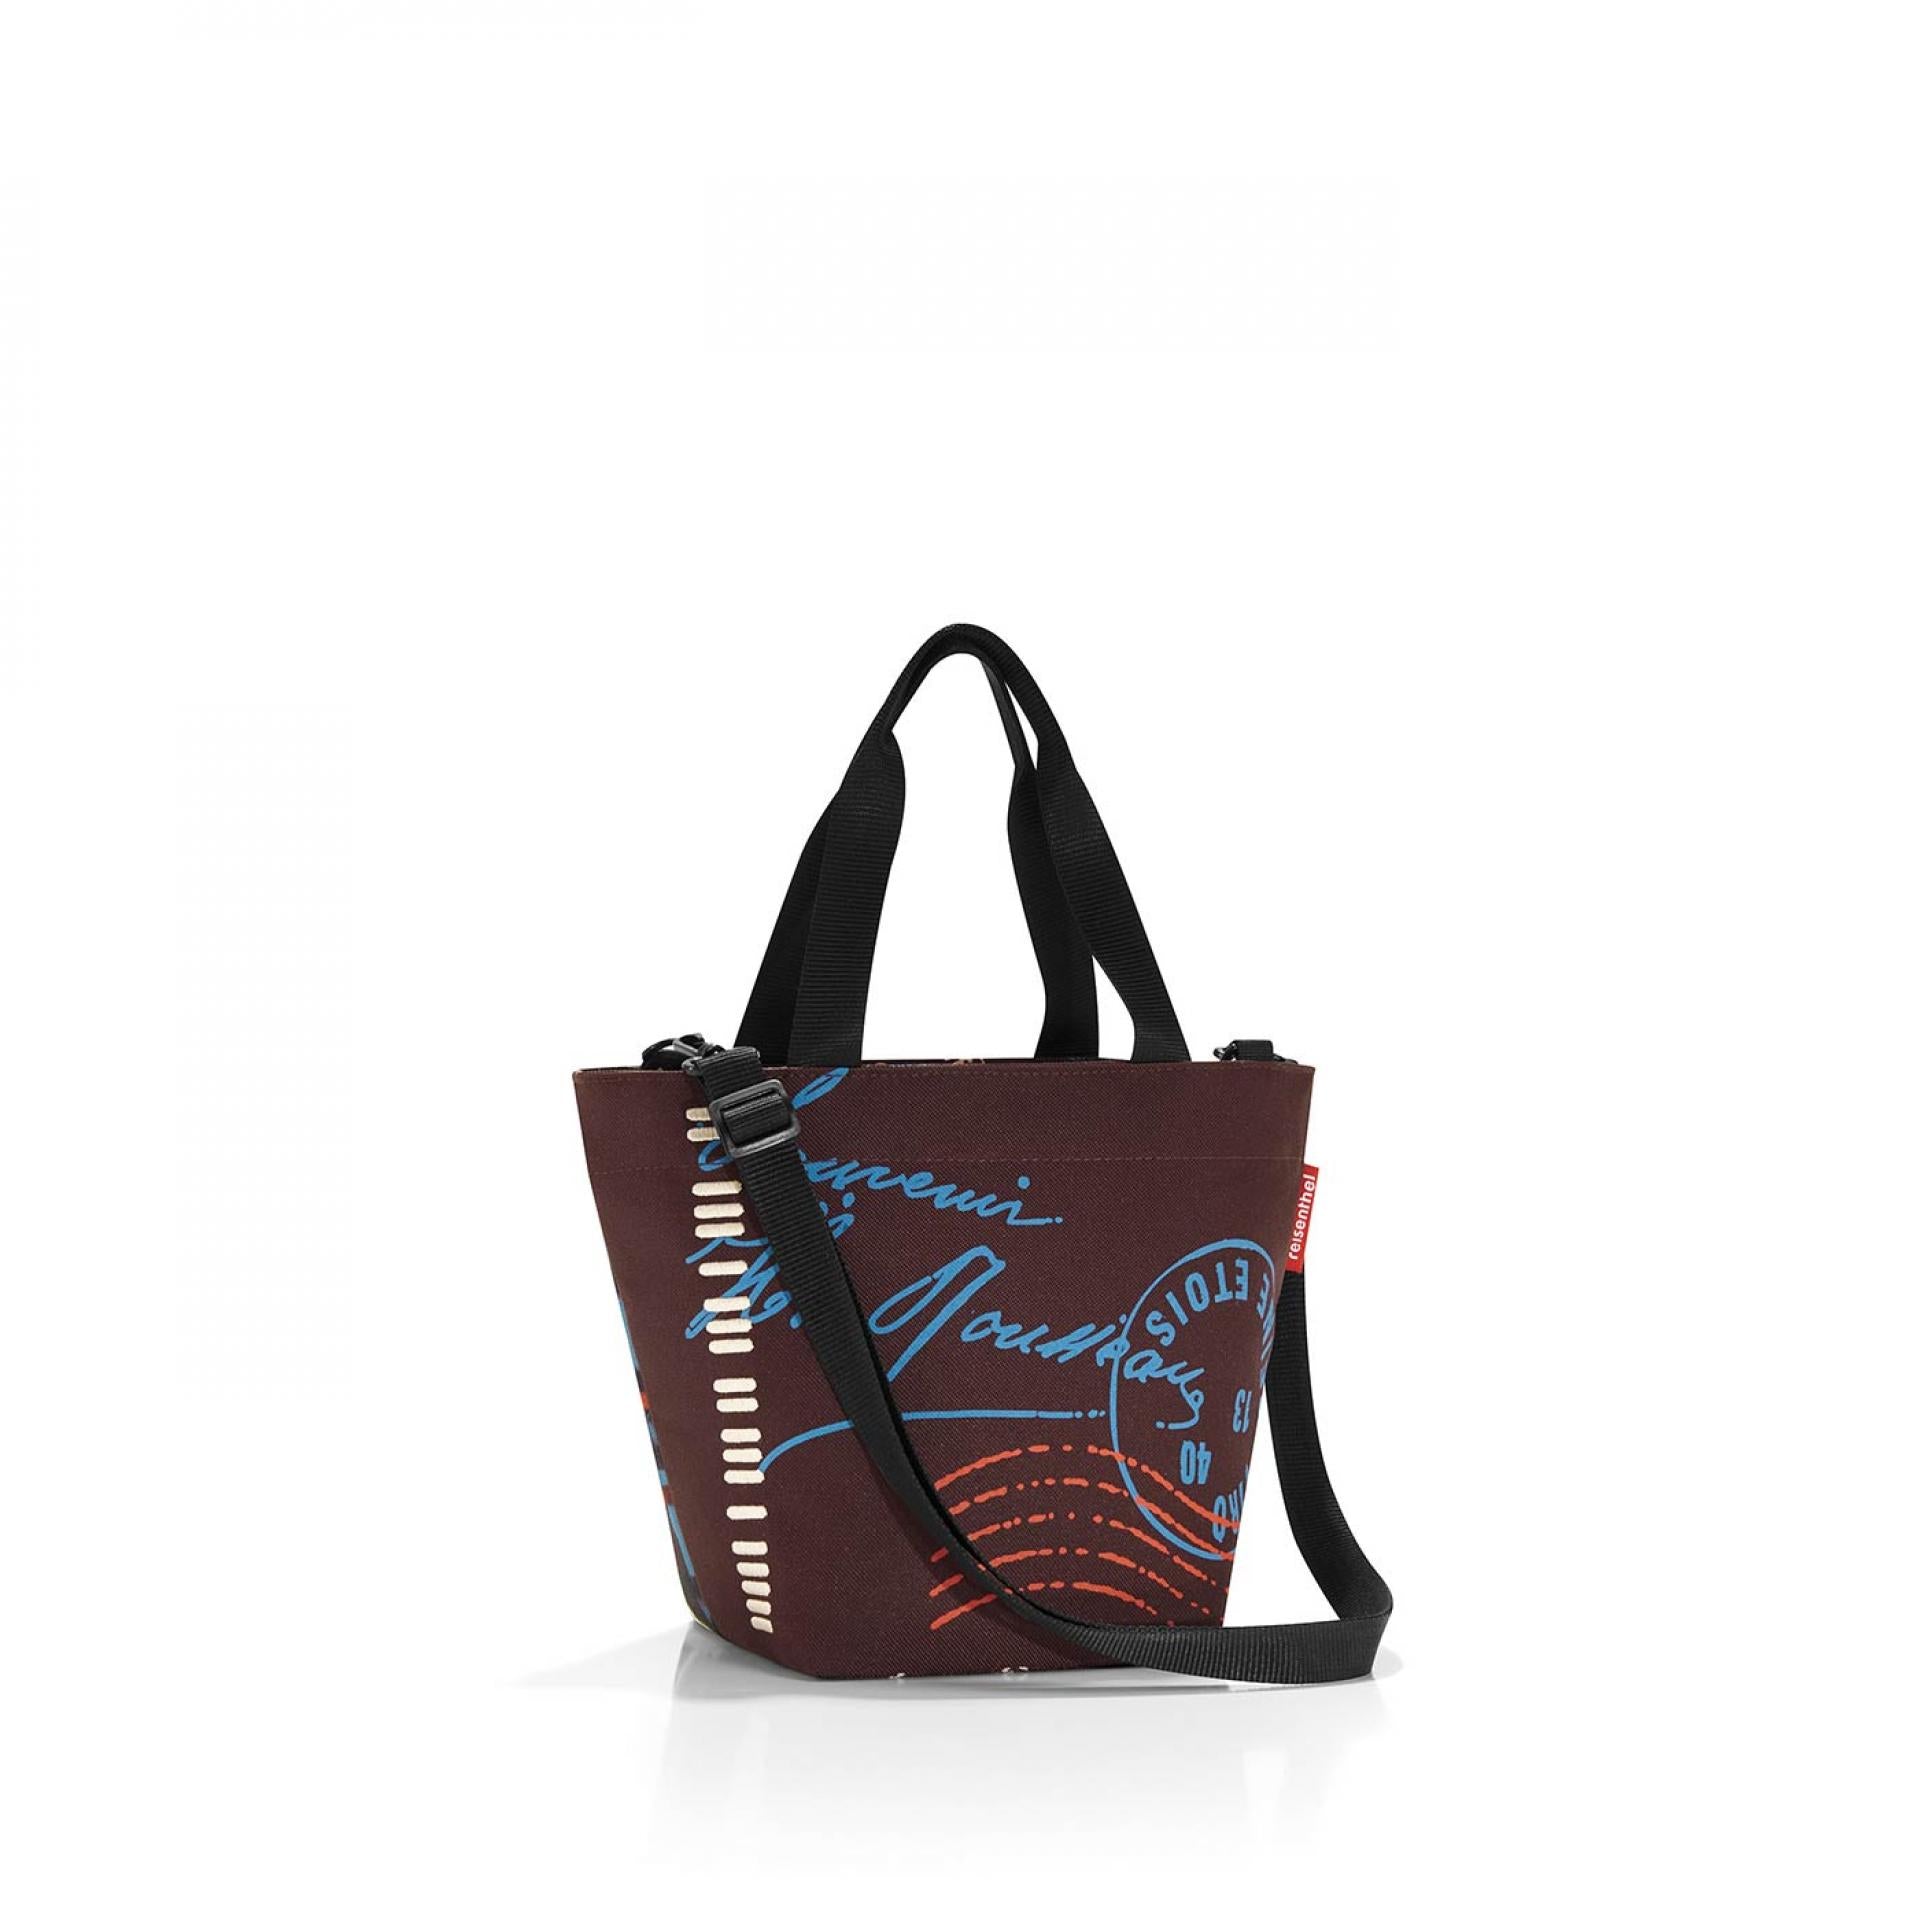 Kindertasche Shopper XS - Farbe: Special Edition Stamps